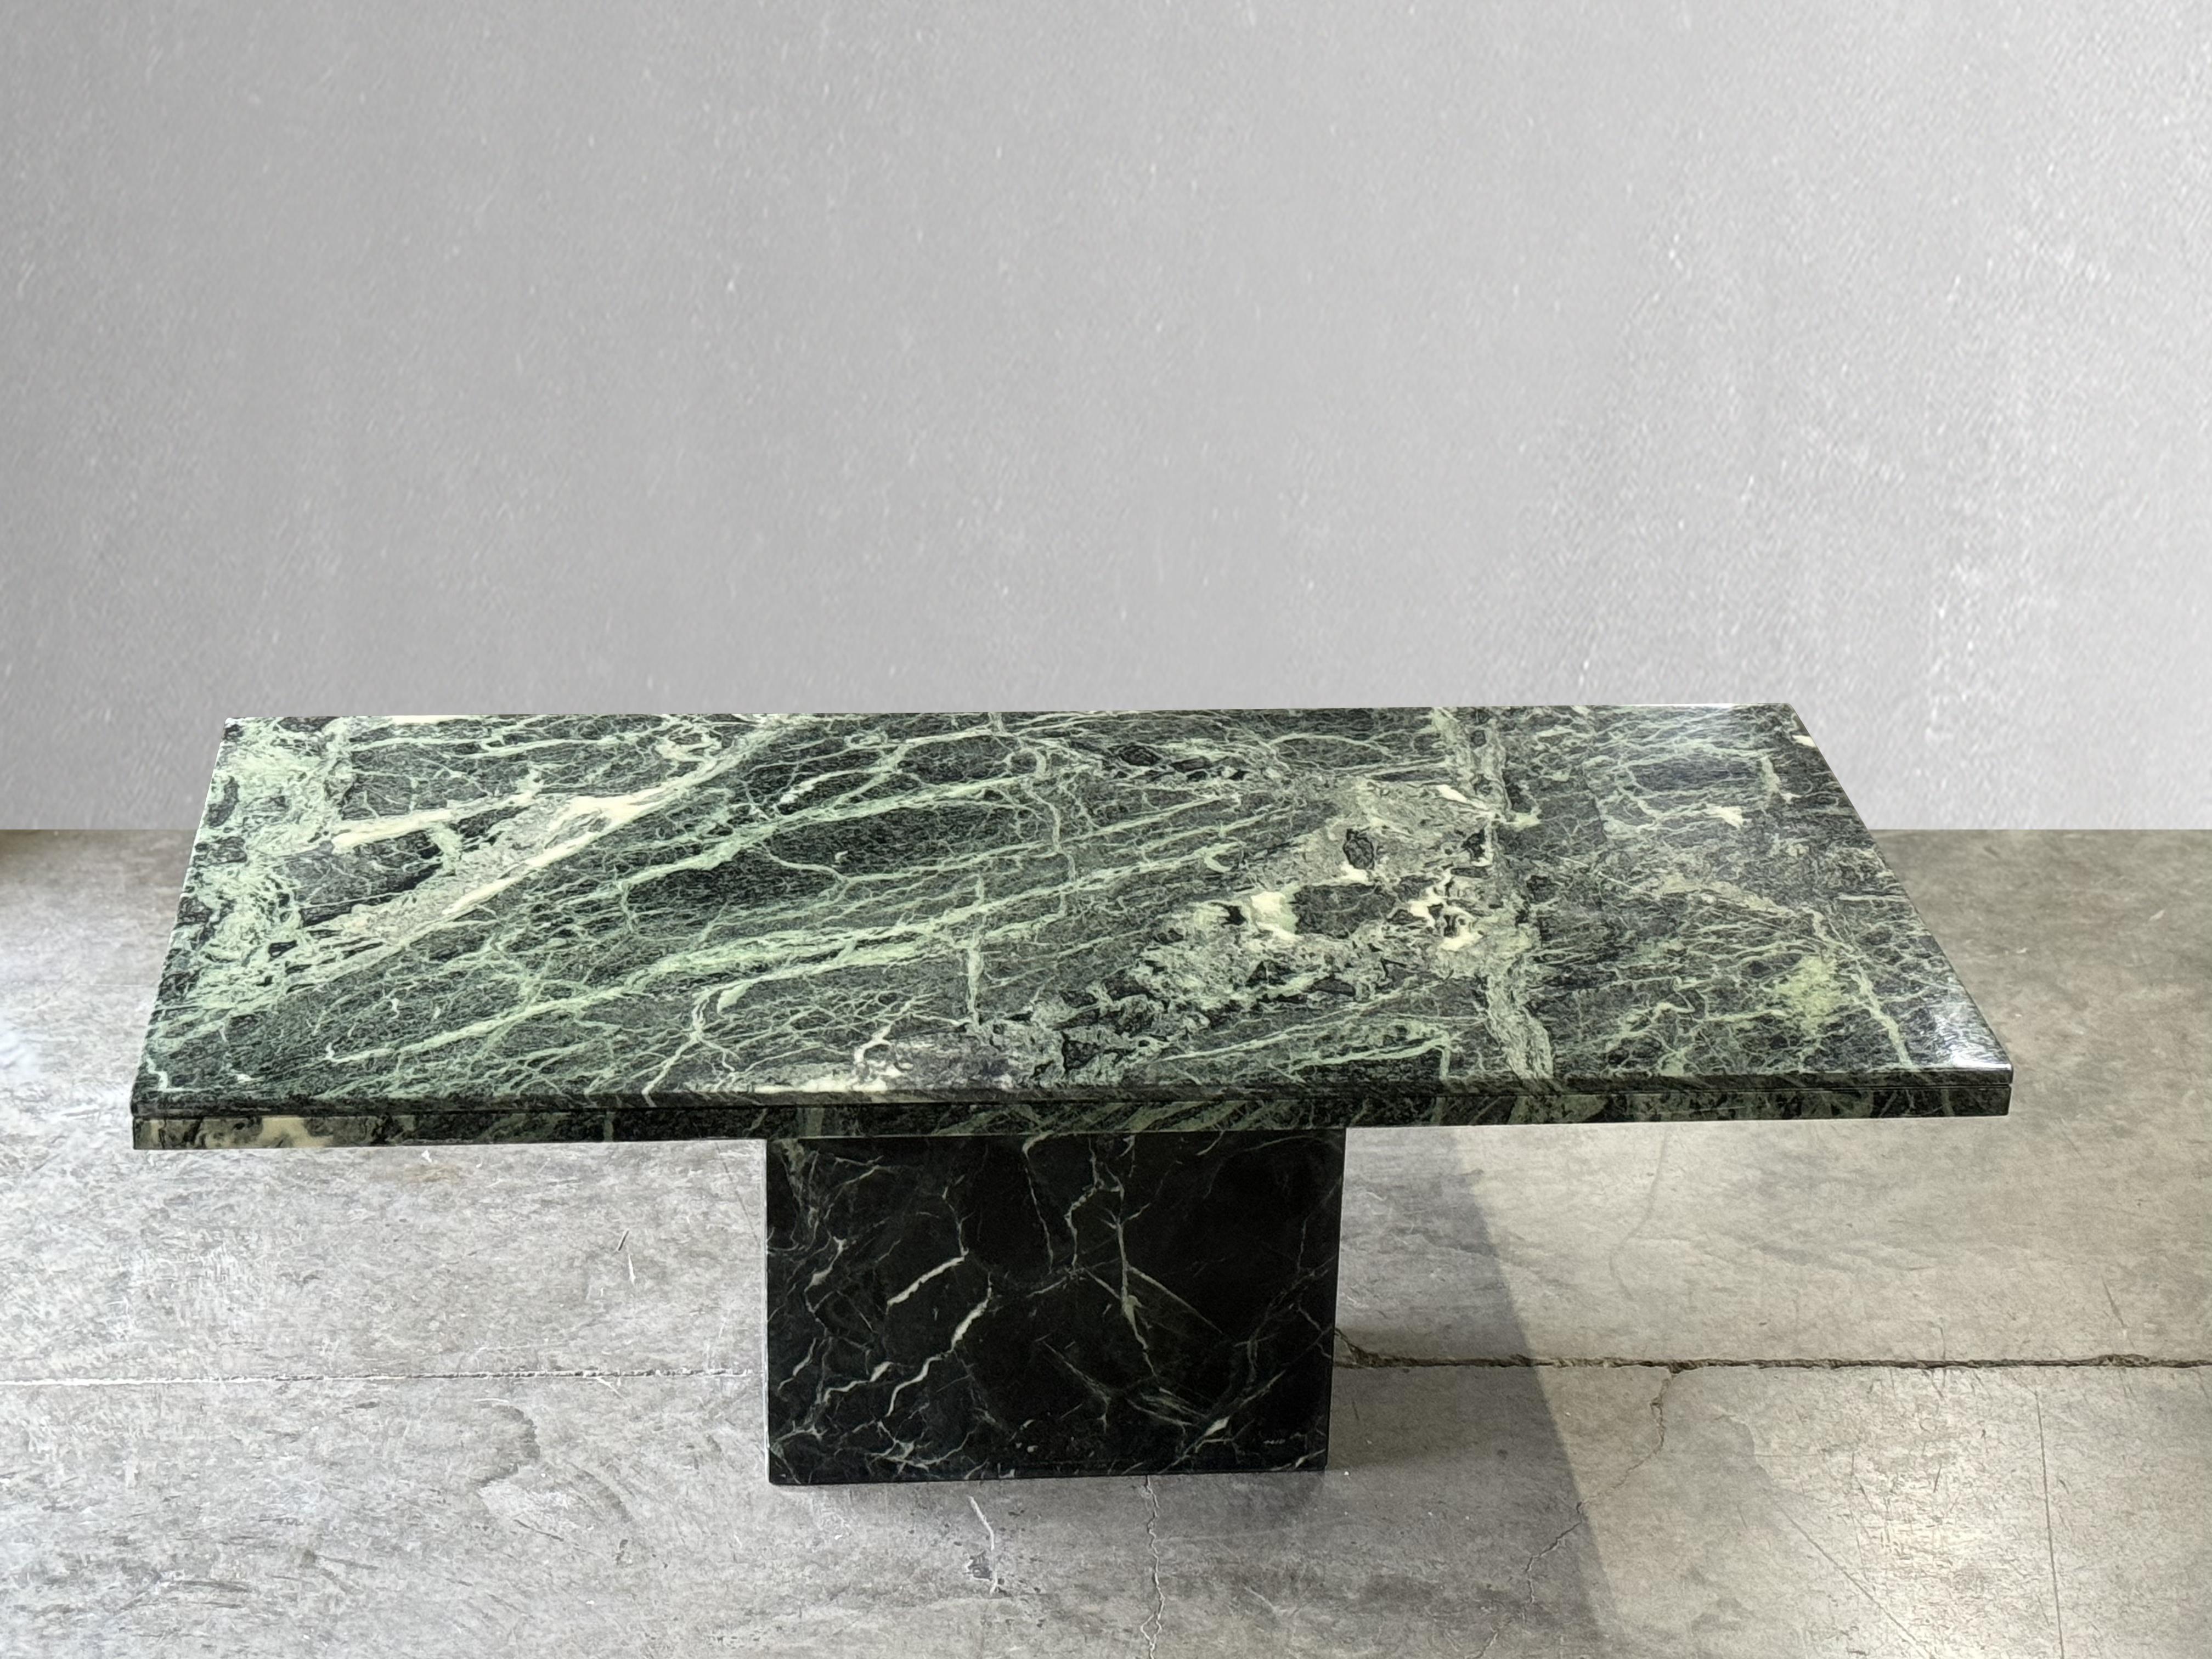 Striking Green Serpentine Marble Dining Table. 

C. 1980

Rectangular serpentine green marble table with beautiful edge detail and matching base. Love the natural movement and different shades of green. Pairs well with many different styles of